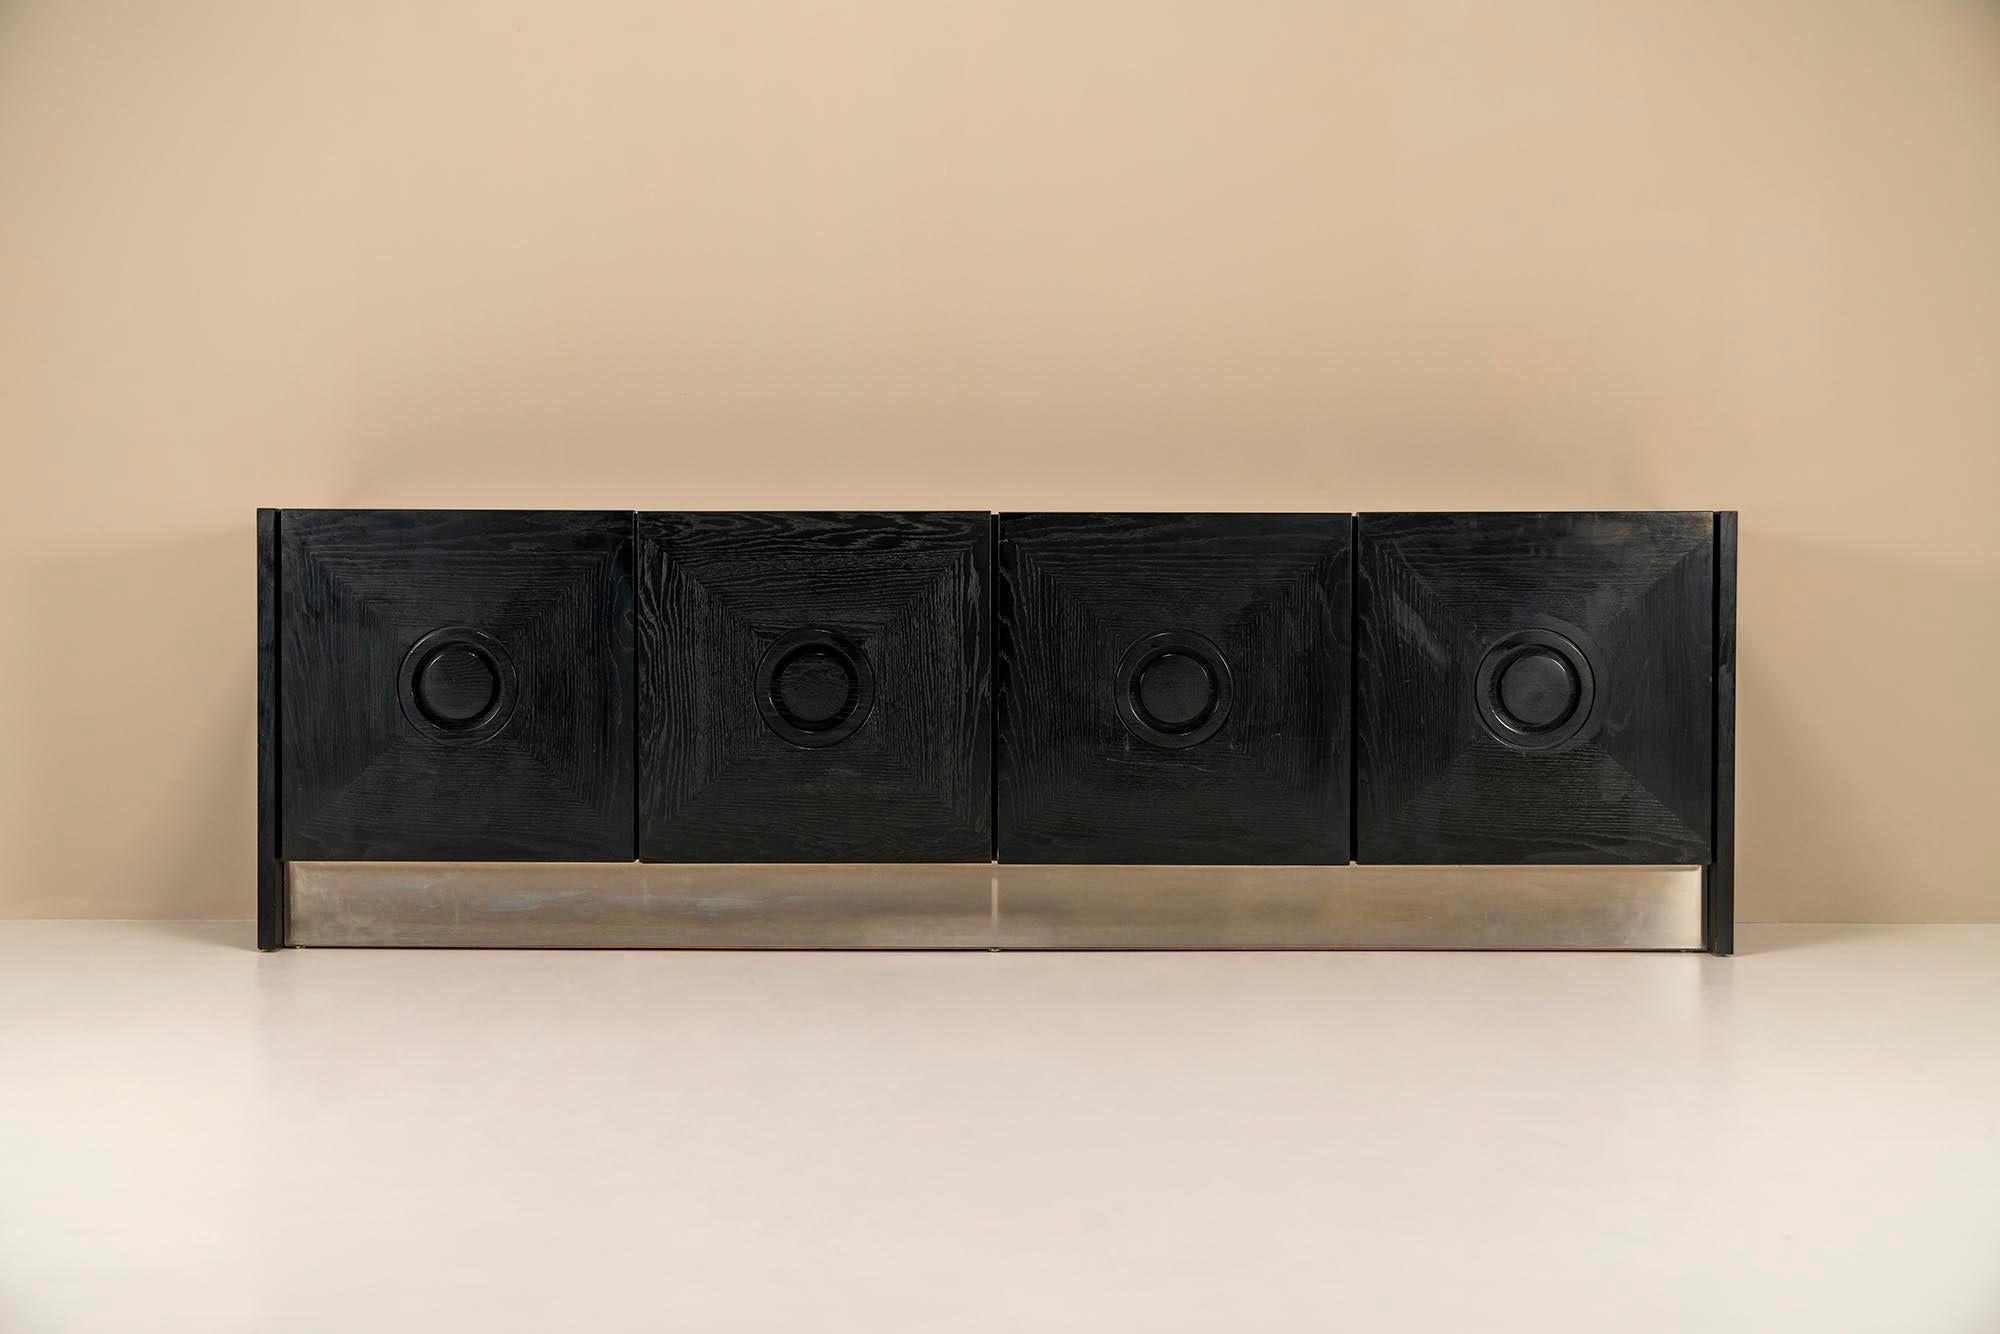 Brutalist sideboard in black stained oak and brushed steel.This sideboard has a really impressive look due to the sleek finish of the glossy wood and steel strip of brushed steel. The genre to which this sideboard belongs is brutalism and in